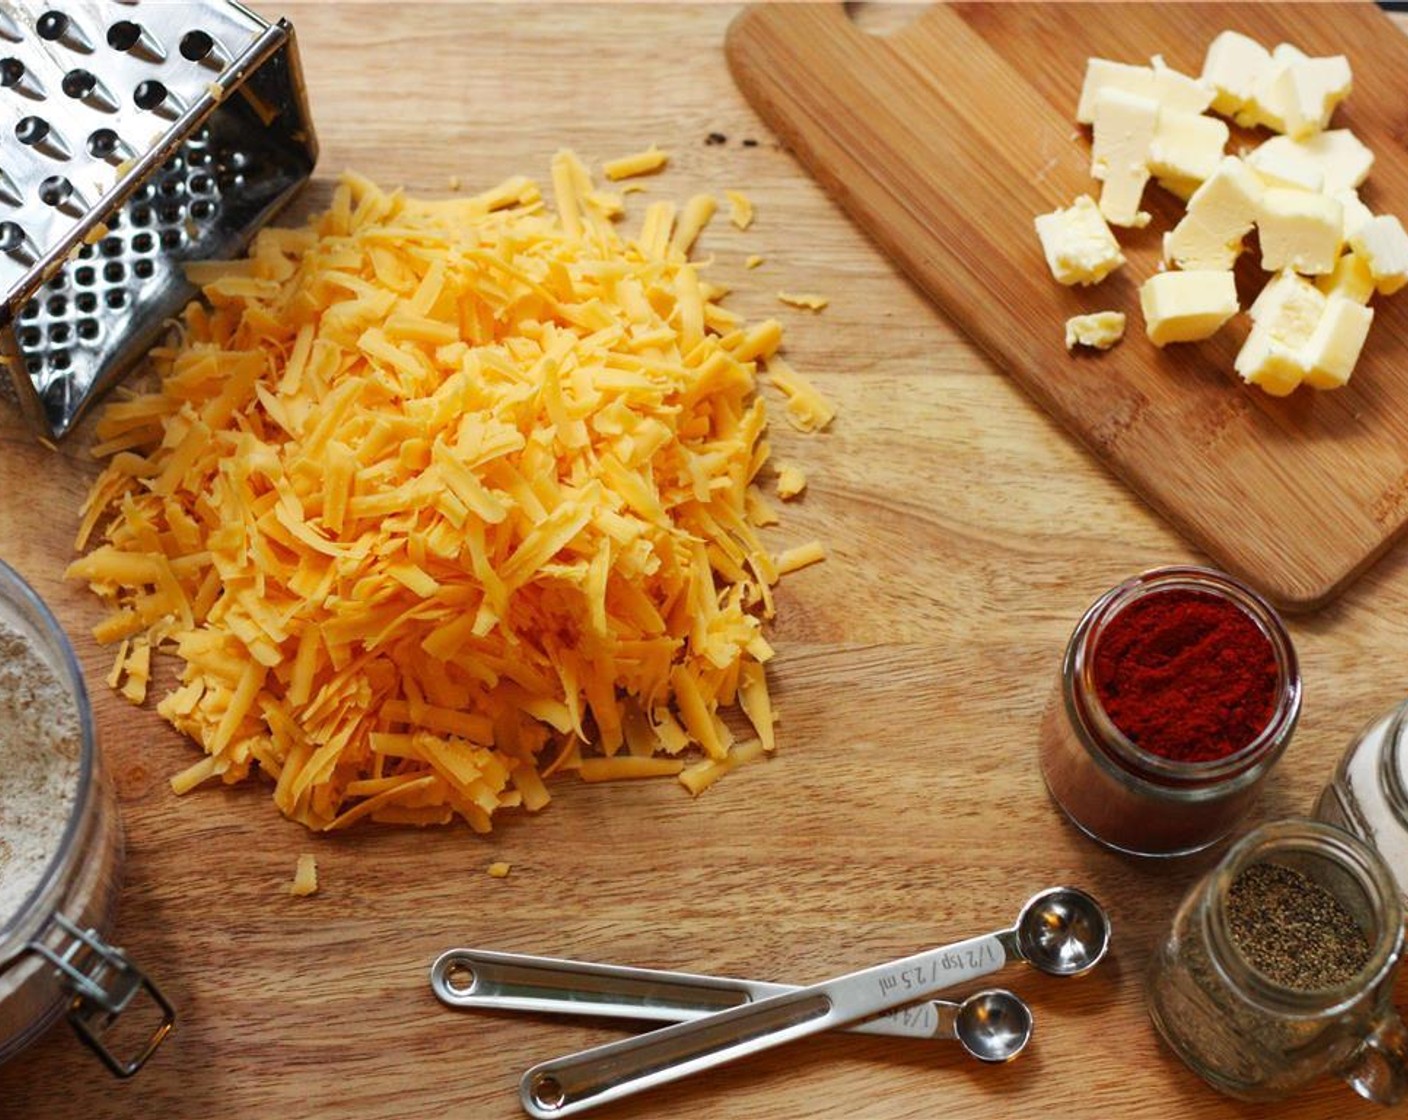 step 1 Grate the Sharp Cheddar Cheese (2 cups). Cube the Unsalted Butter (1/4 cup).